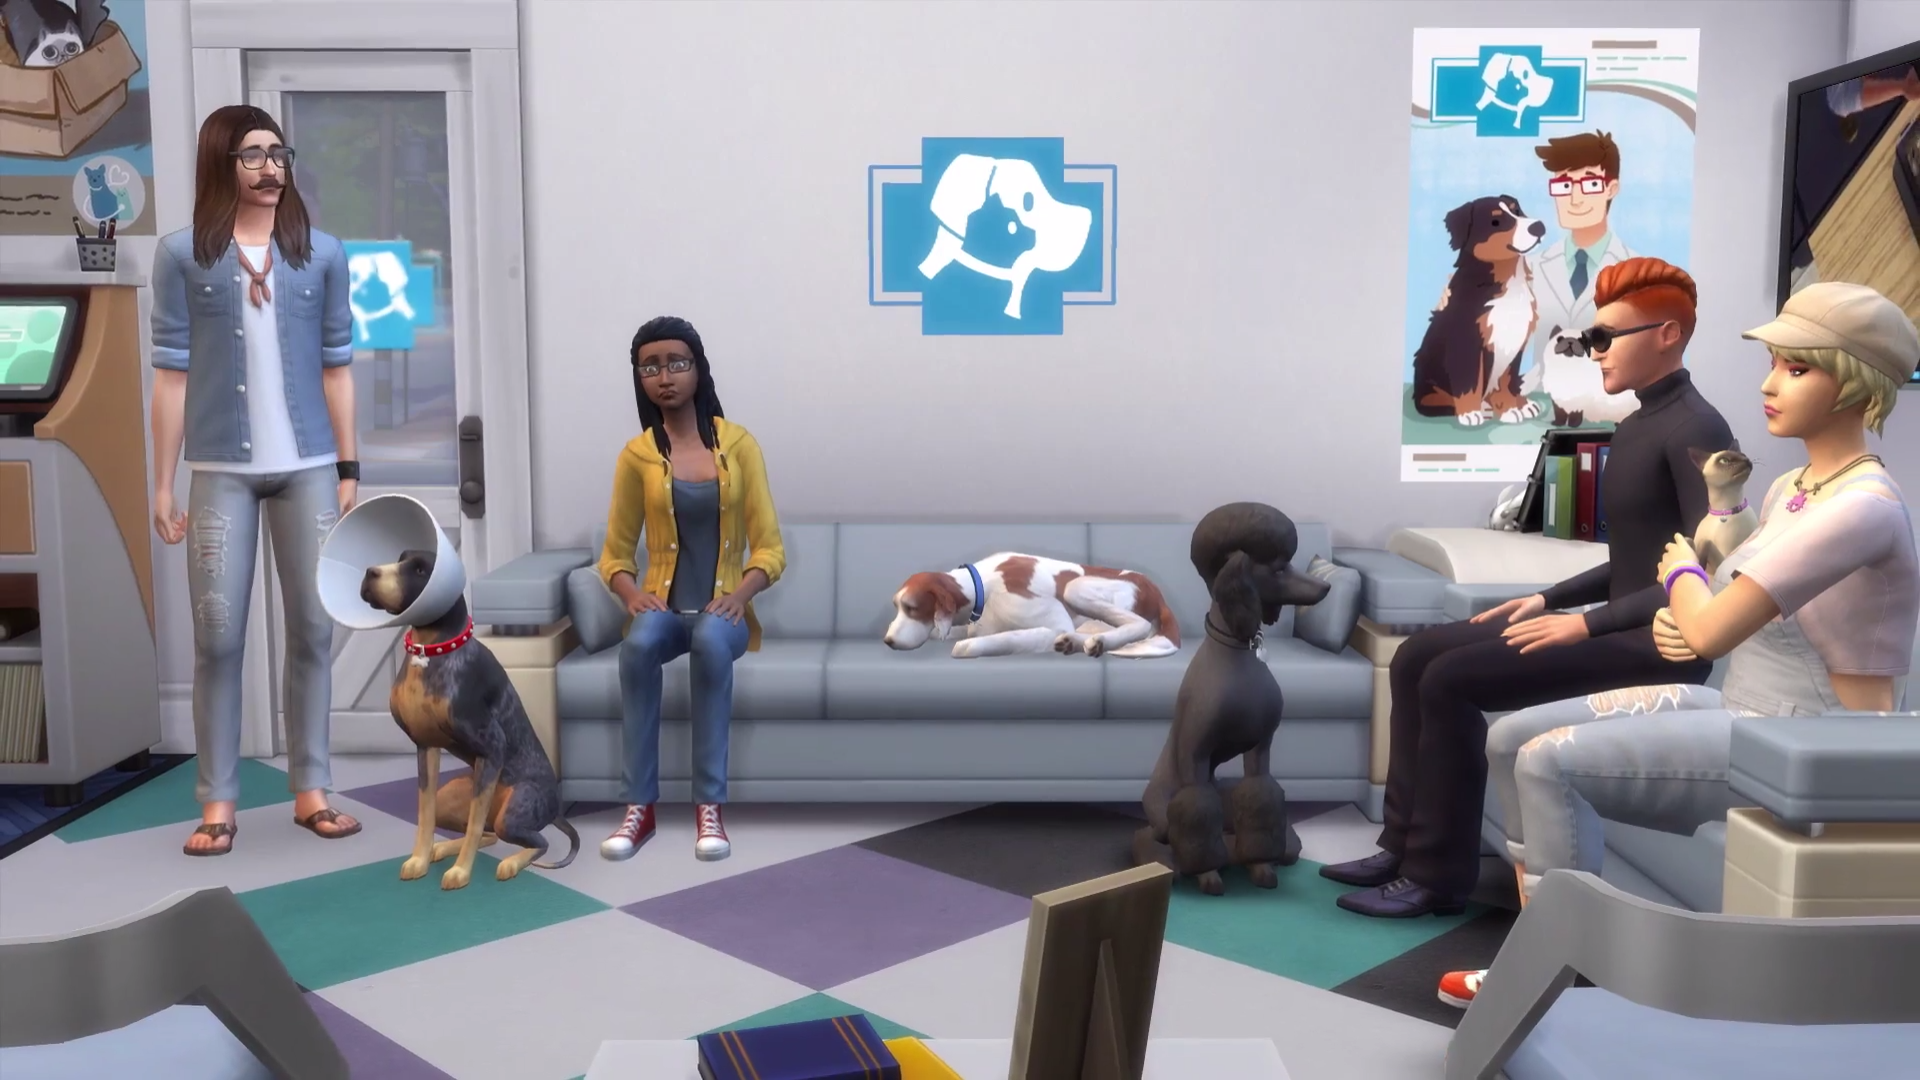 2017-08-21 19_16_28-The Sims 4 Cats & Dogs_ Official Reveal Trailer - YouTube